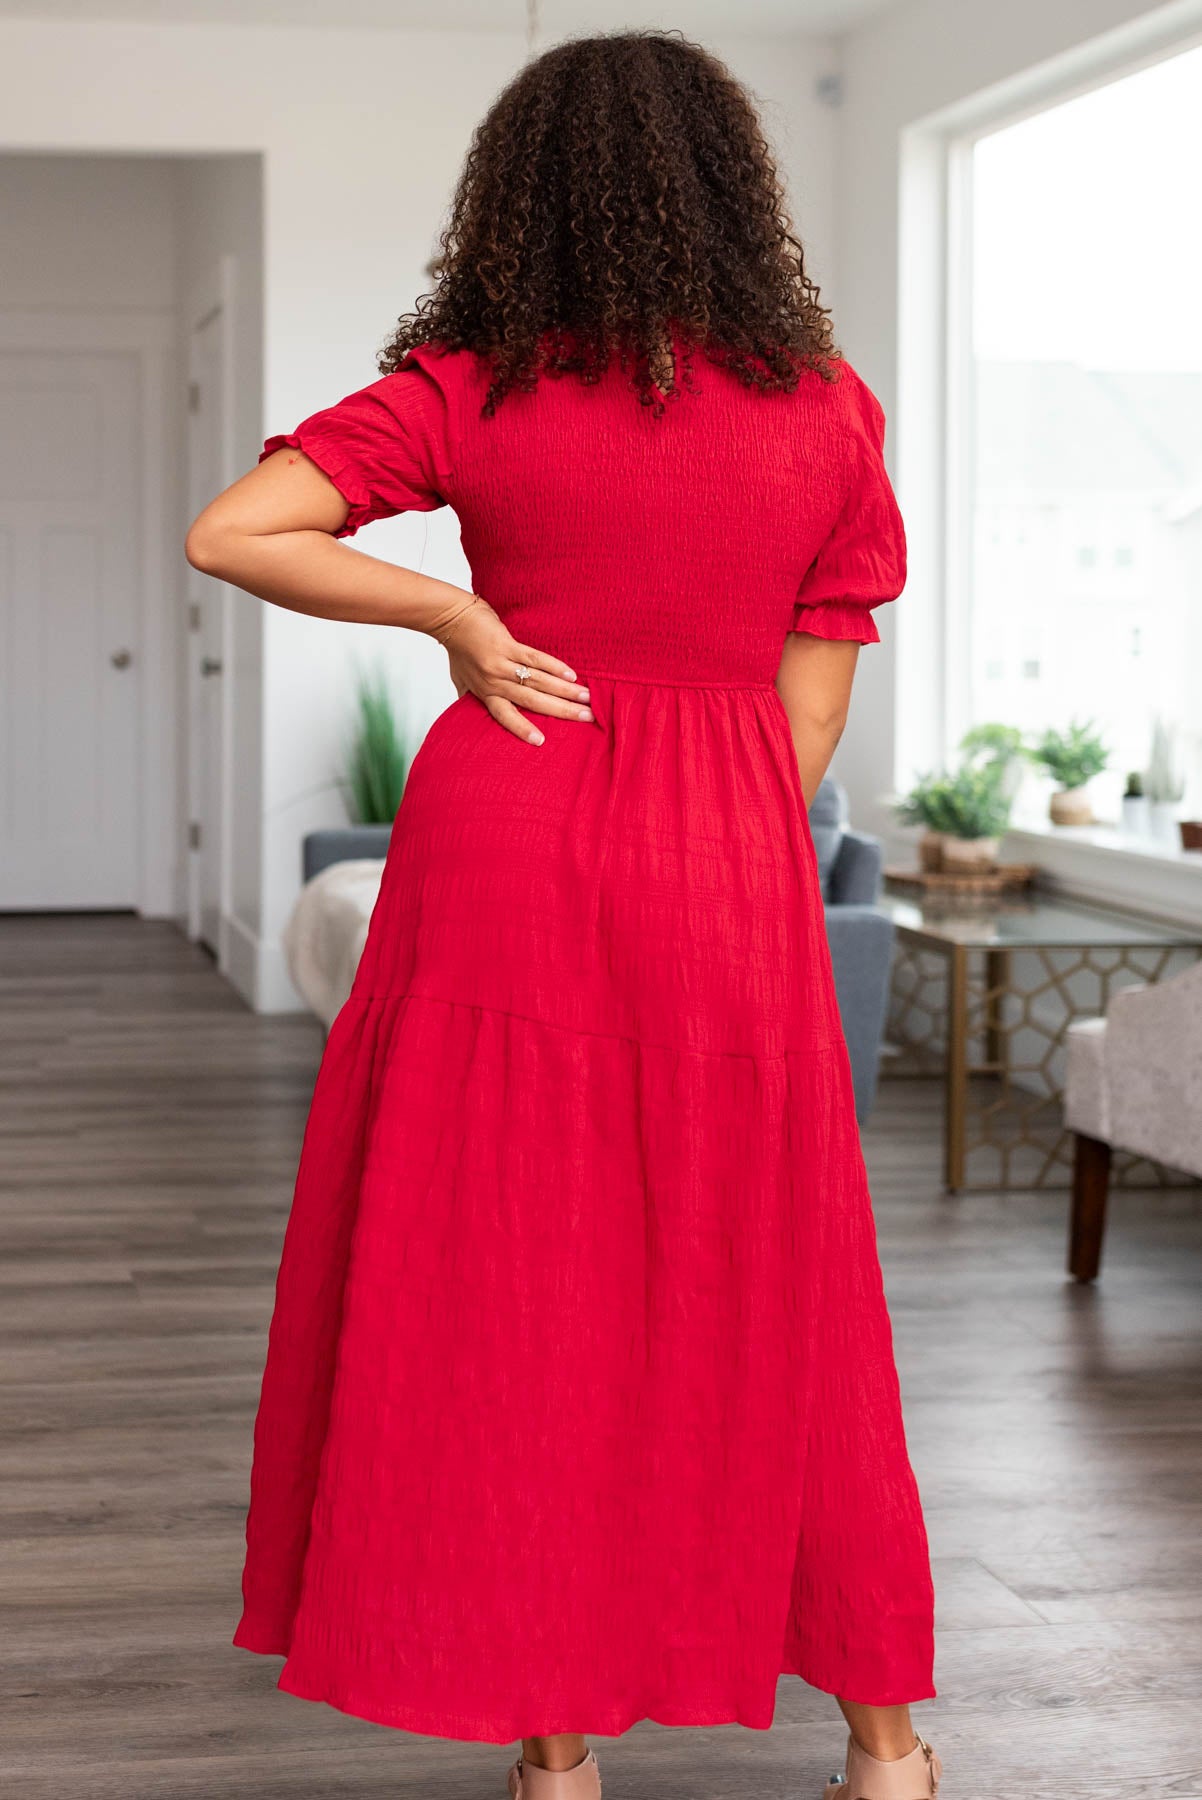 Back view of a red smocked dress